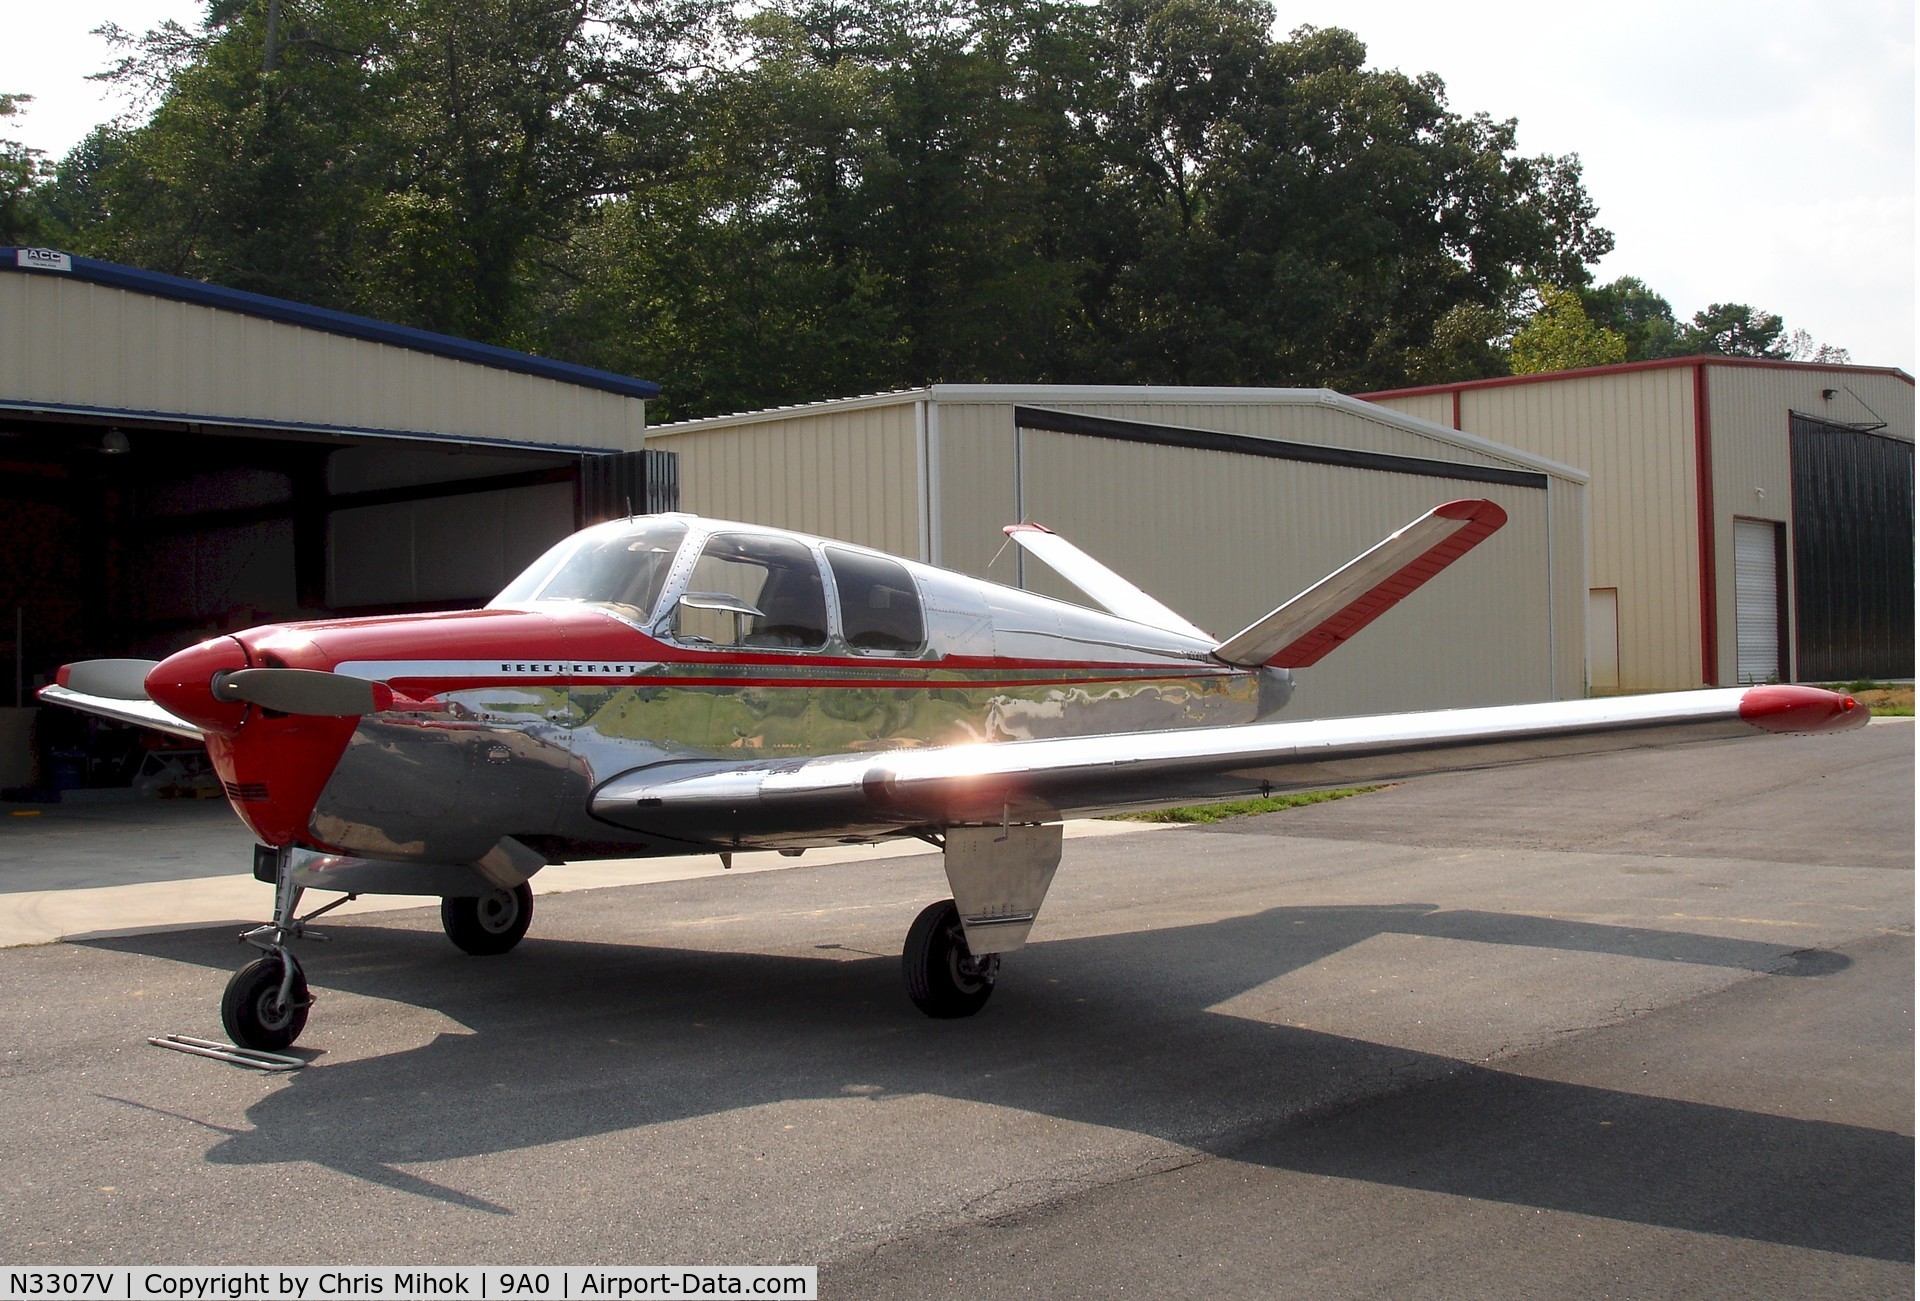 N3307V, 1947 Beech 35 Bonanza C/N D-766, Manufactured in August 1947 - Sold to Page Airways in New England